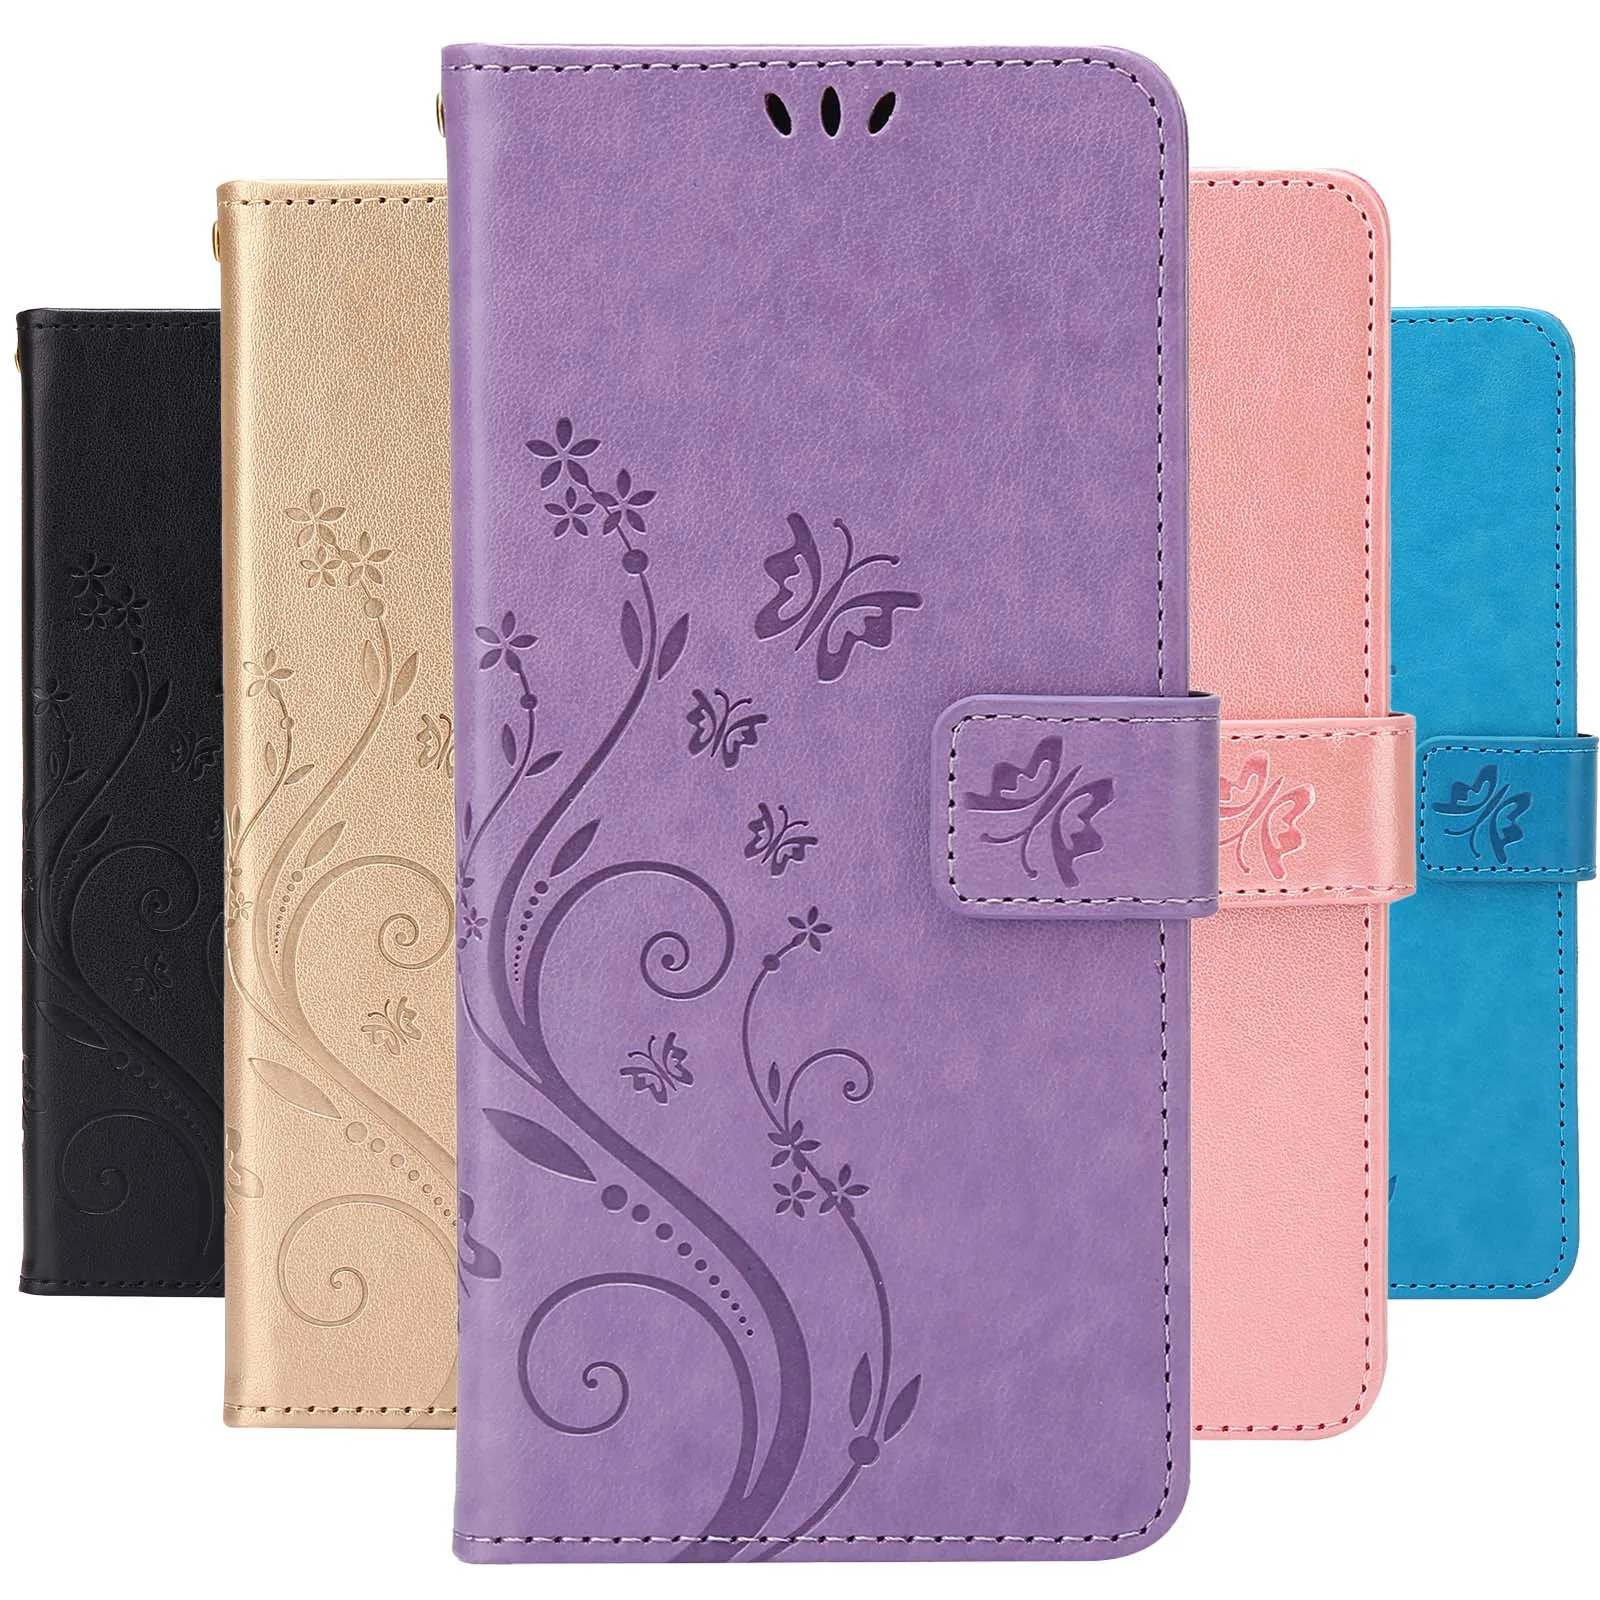 

Wallet Leather Case For Samsung Galaxy A13 A23 A33 A53 A73 A12 A22 A32 A52S A72 A51 A71 A10 A20 A30 A50 A70 Card Holder Cover